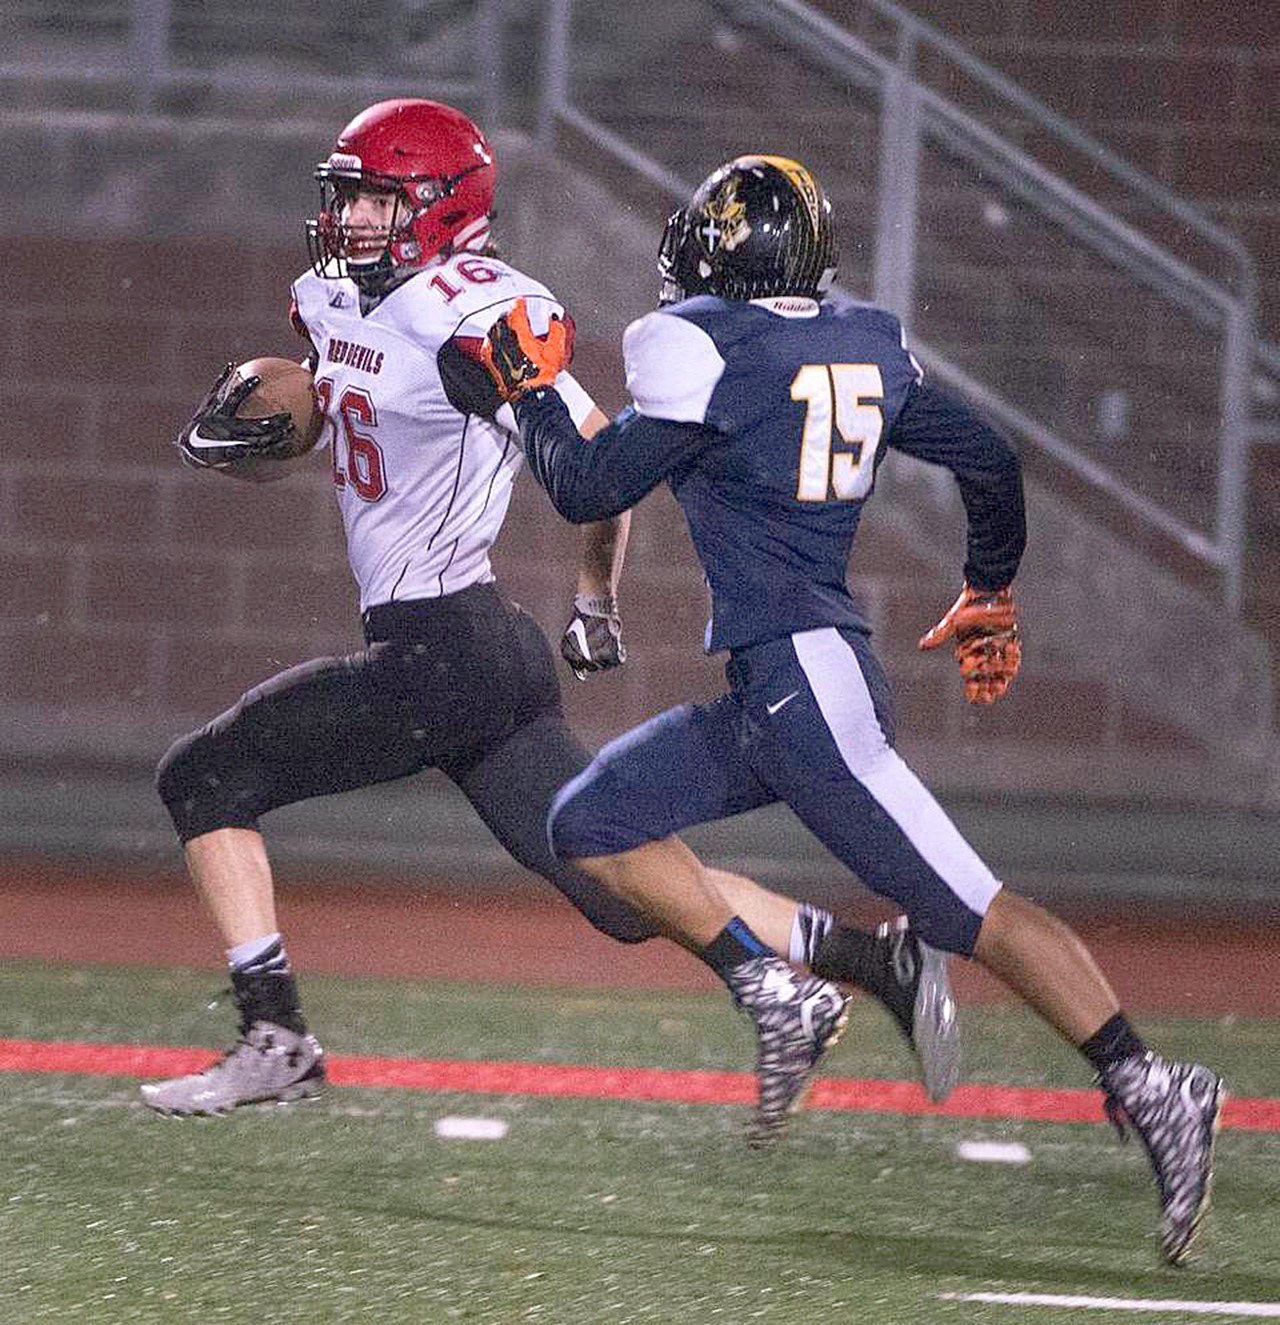 McClatchy News Service Neah Bay’s Cole Svec rips off a long gain as Tacoma Baptist’s Dalen Wilber pursues during the Red Devils’ 66-26 Class 1B state quarterfinal win over the Crusaders. Svec ran for 202 yards on just eight carries.